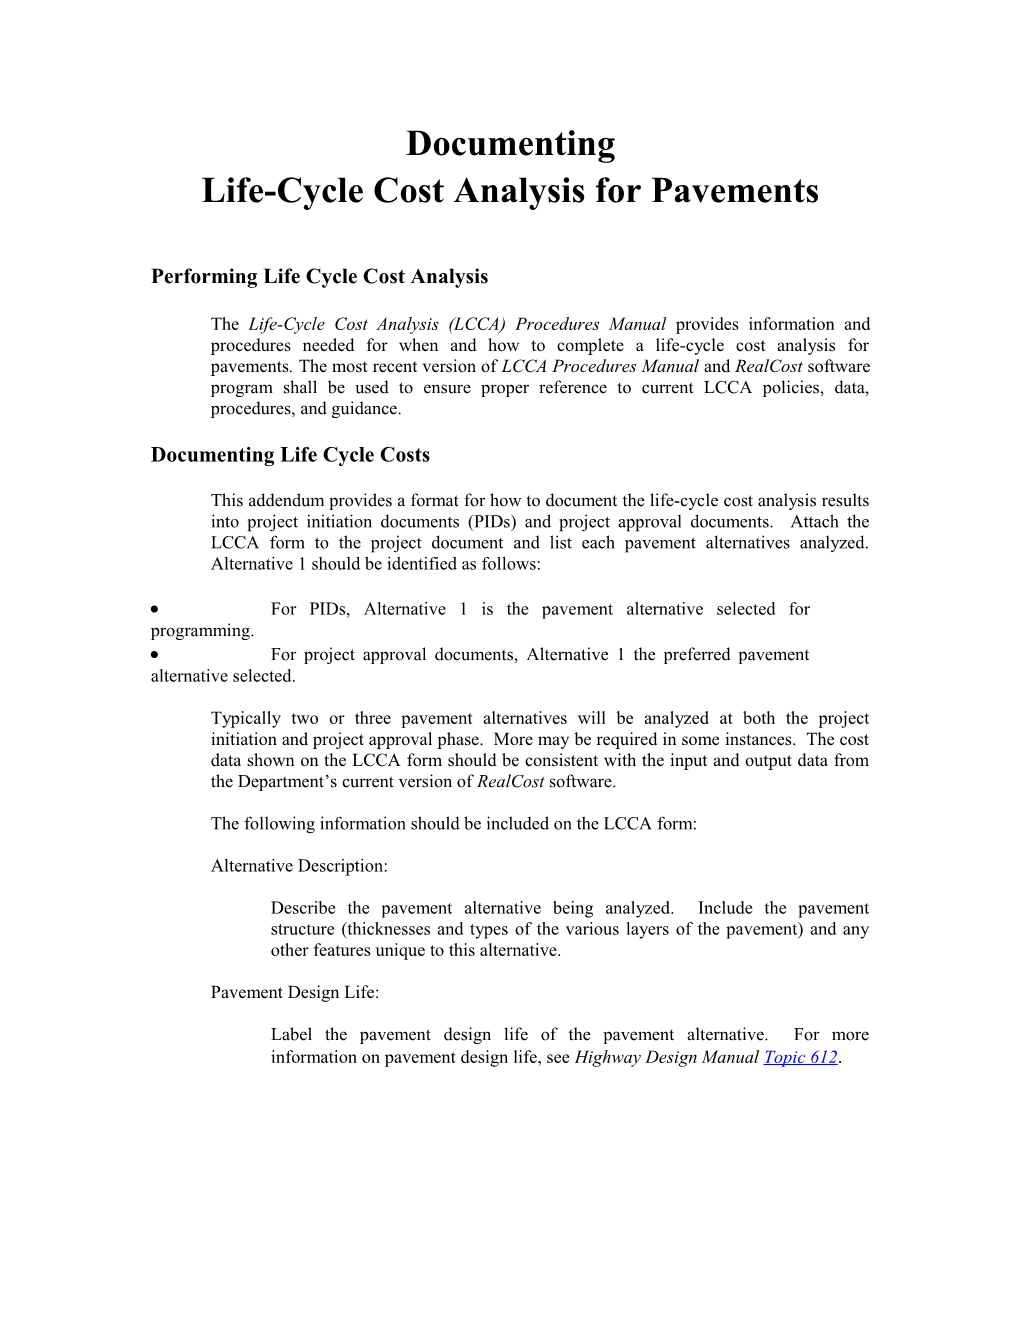 APPENDIX OO Life Cycle Cost